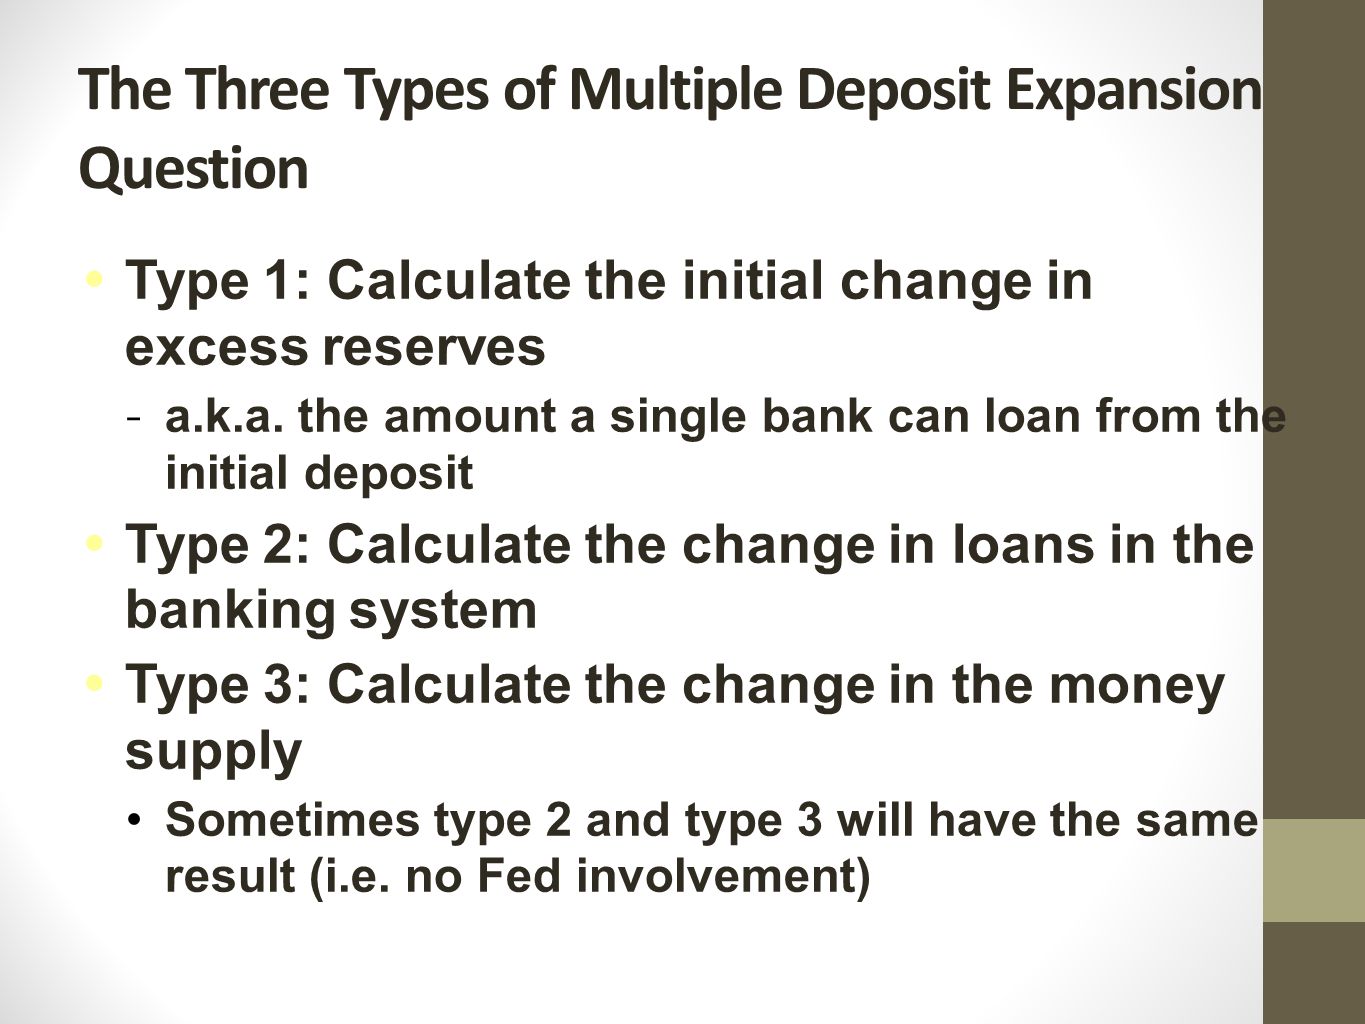 The Three Types of Multiple Deposit Expansion Question